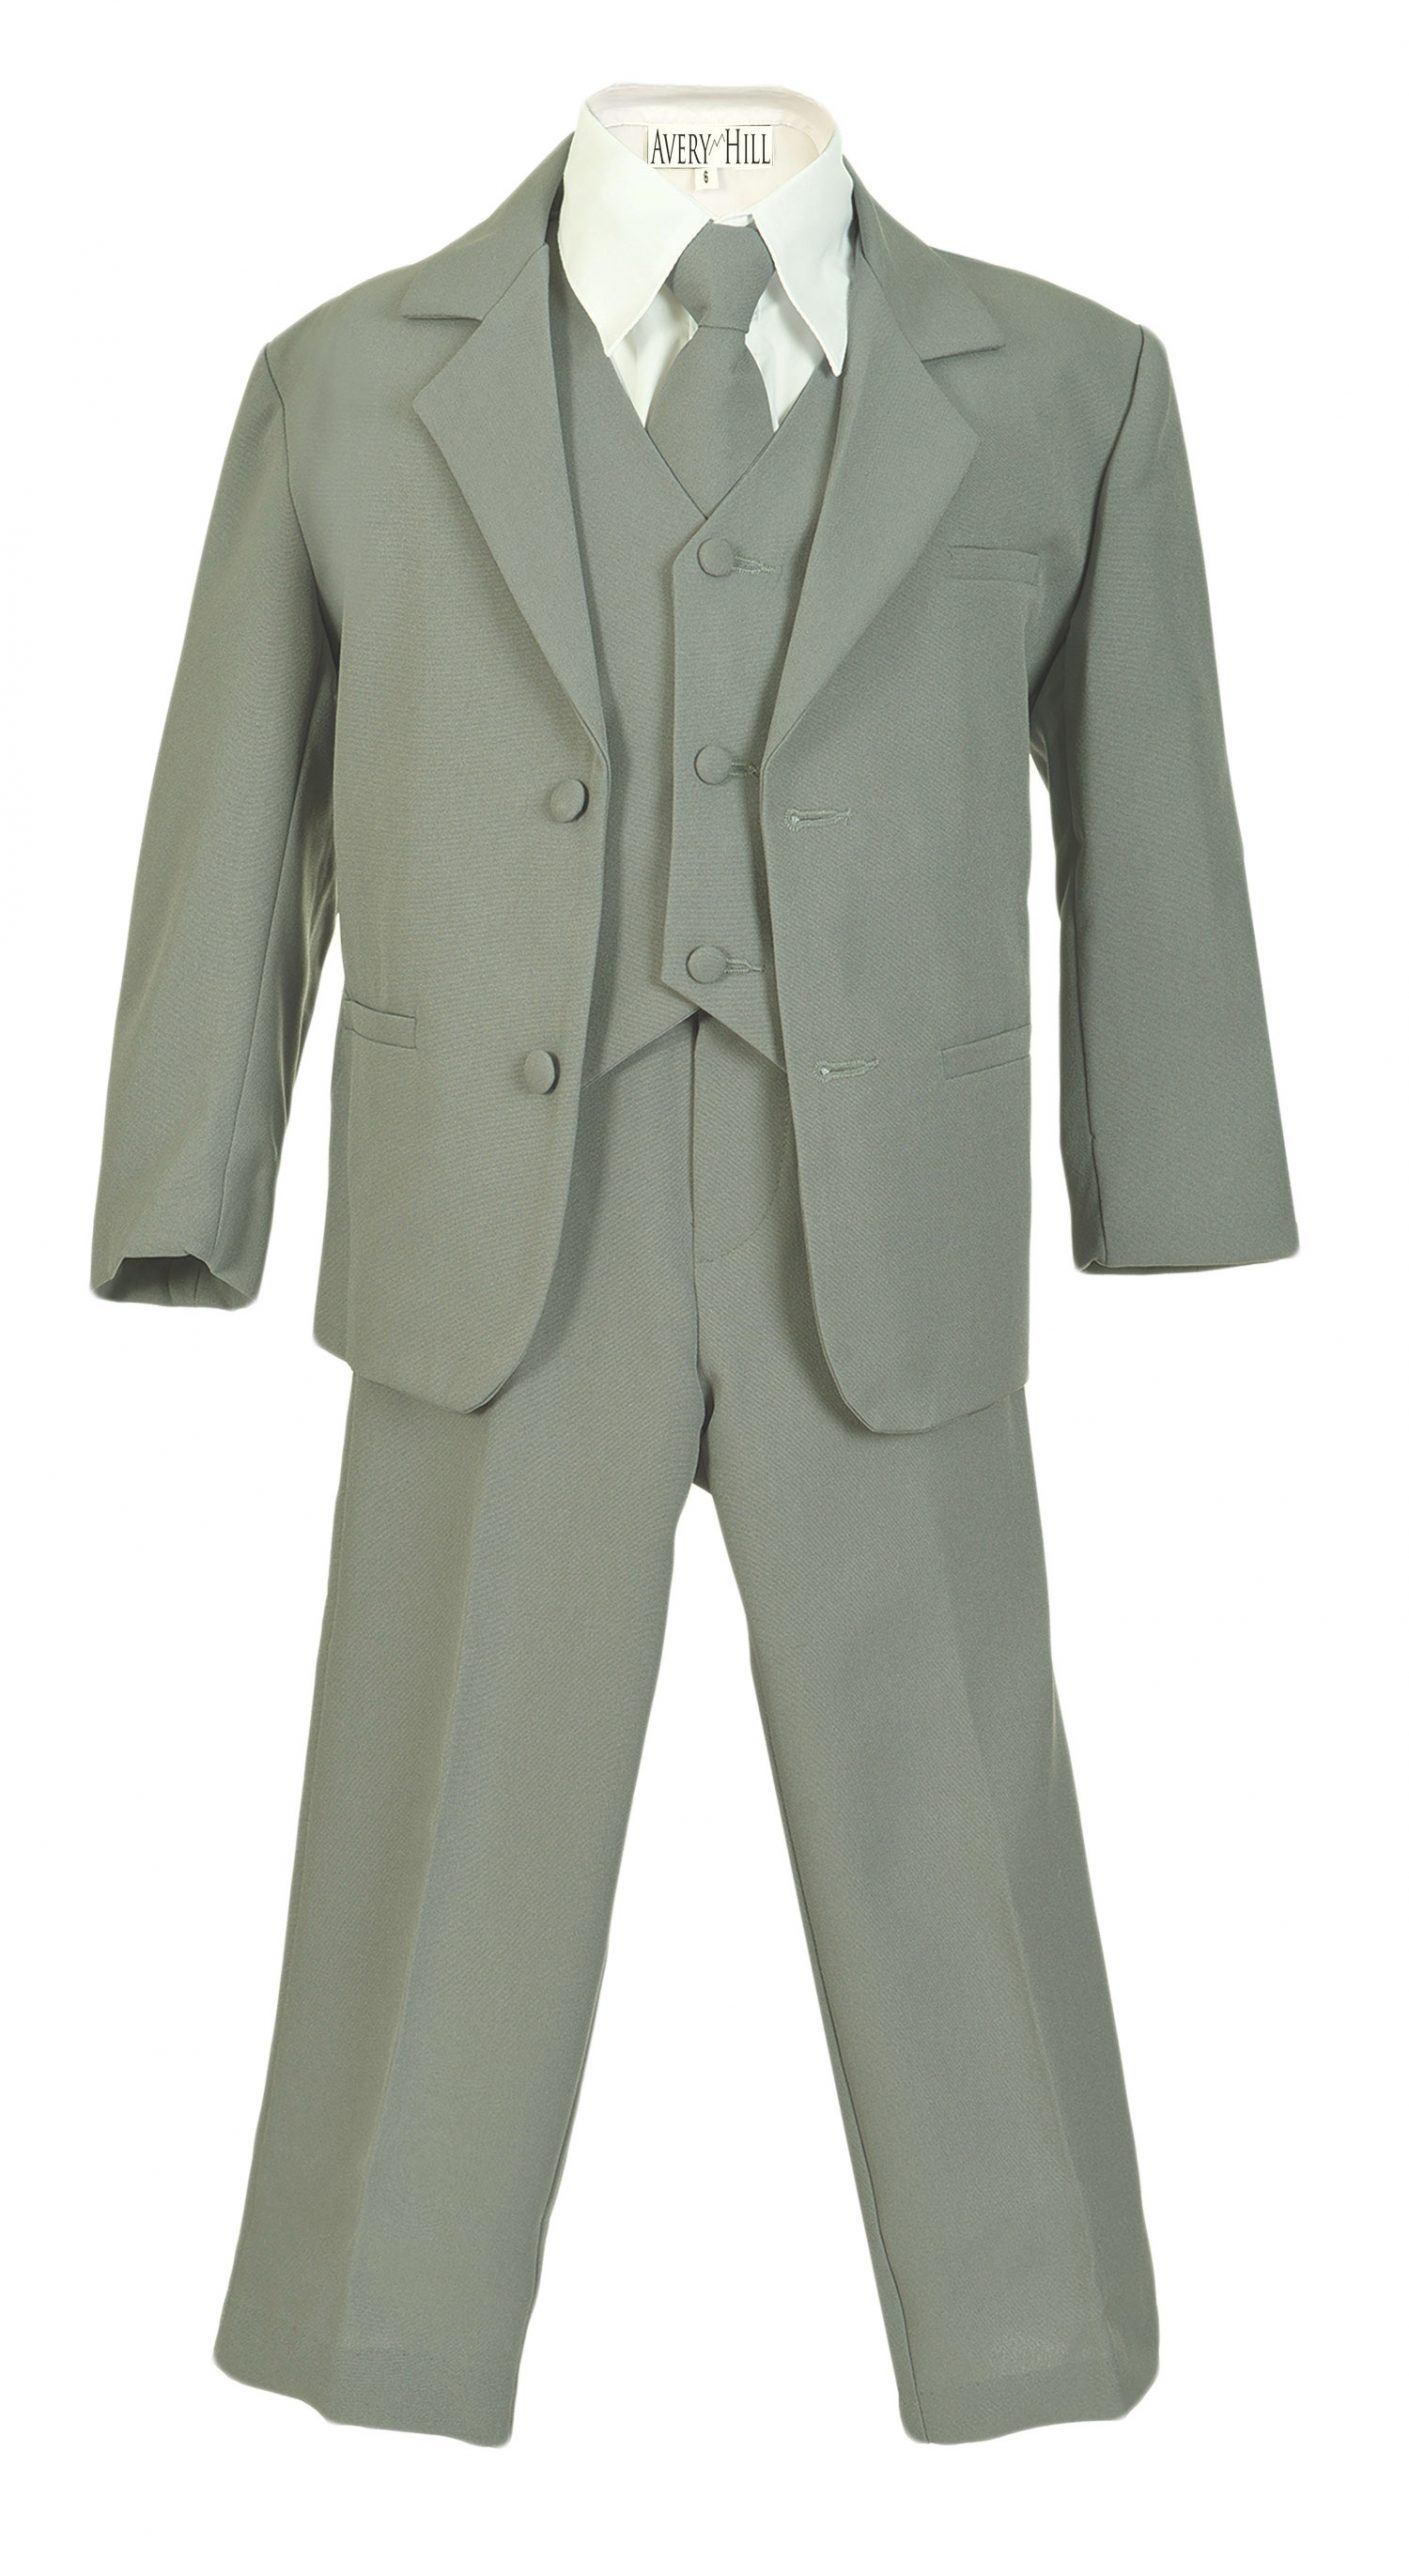 Avery Hill Boys Formal 5 Piece Suit with Shirt and Vest Silver White - 3T